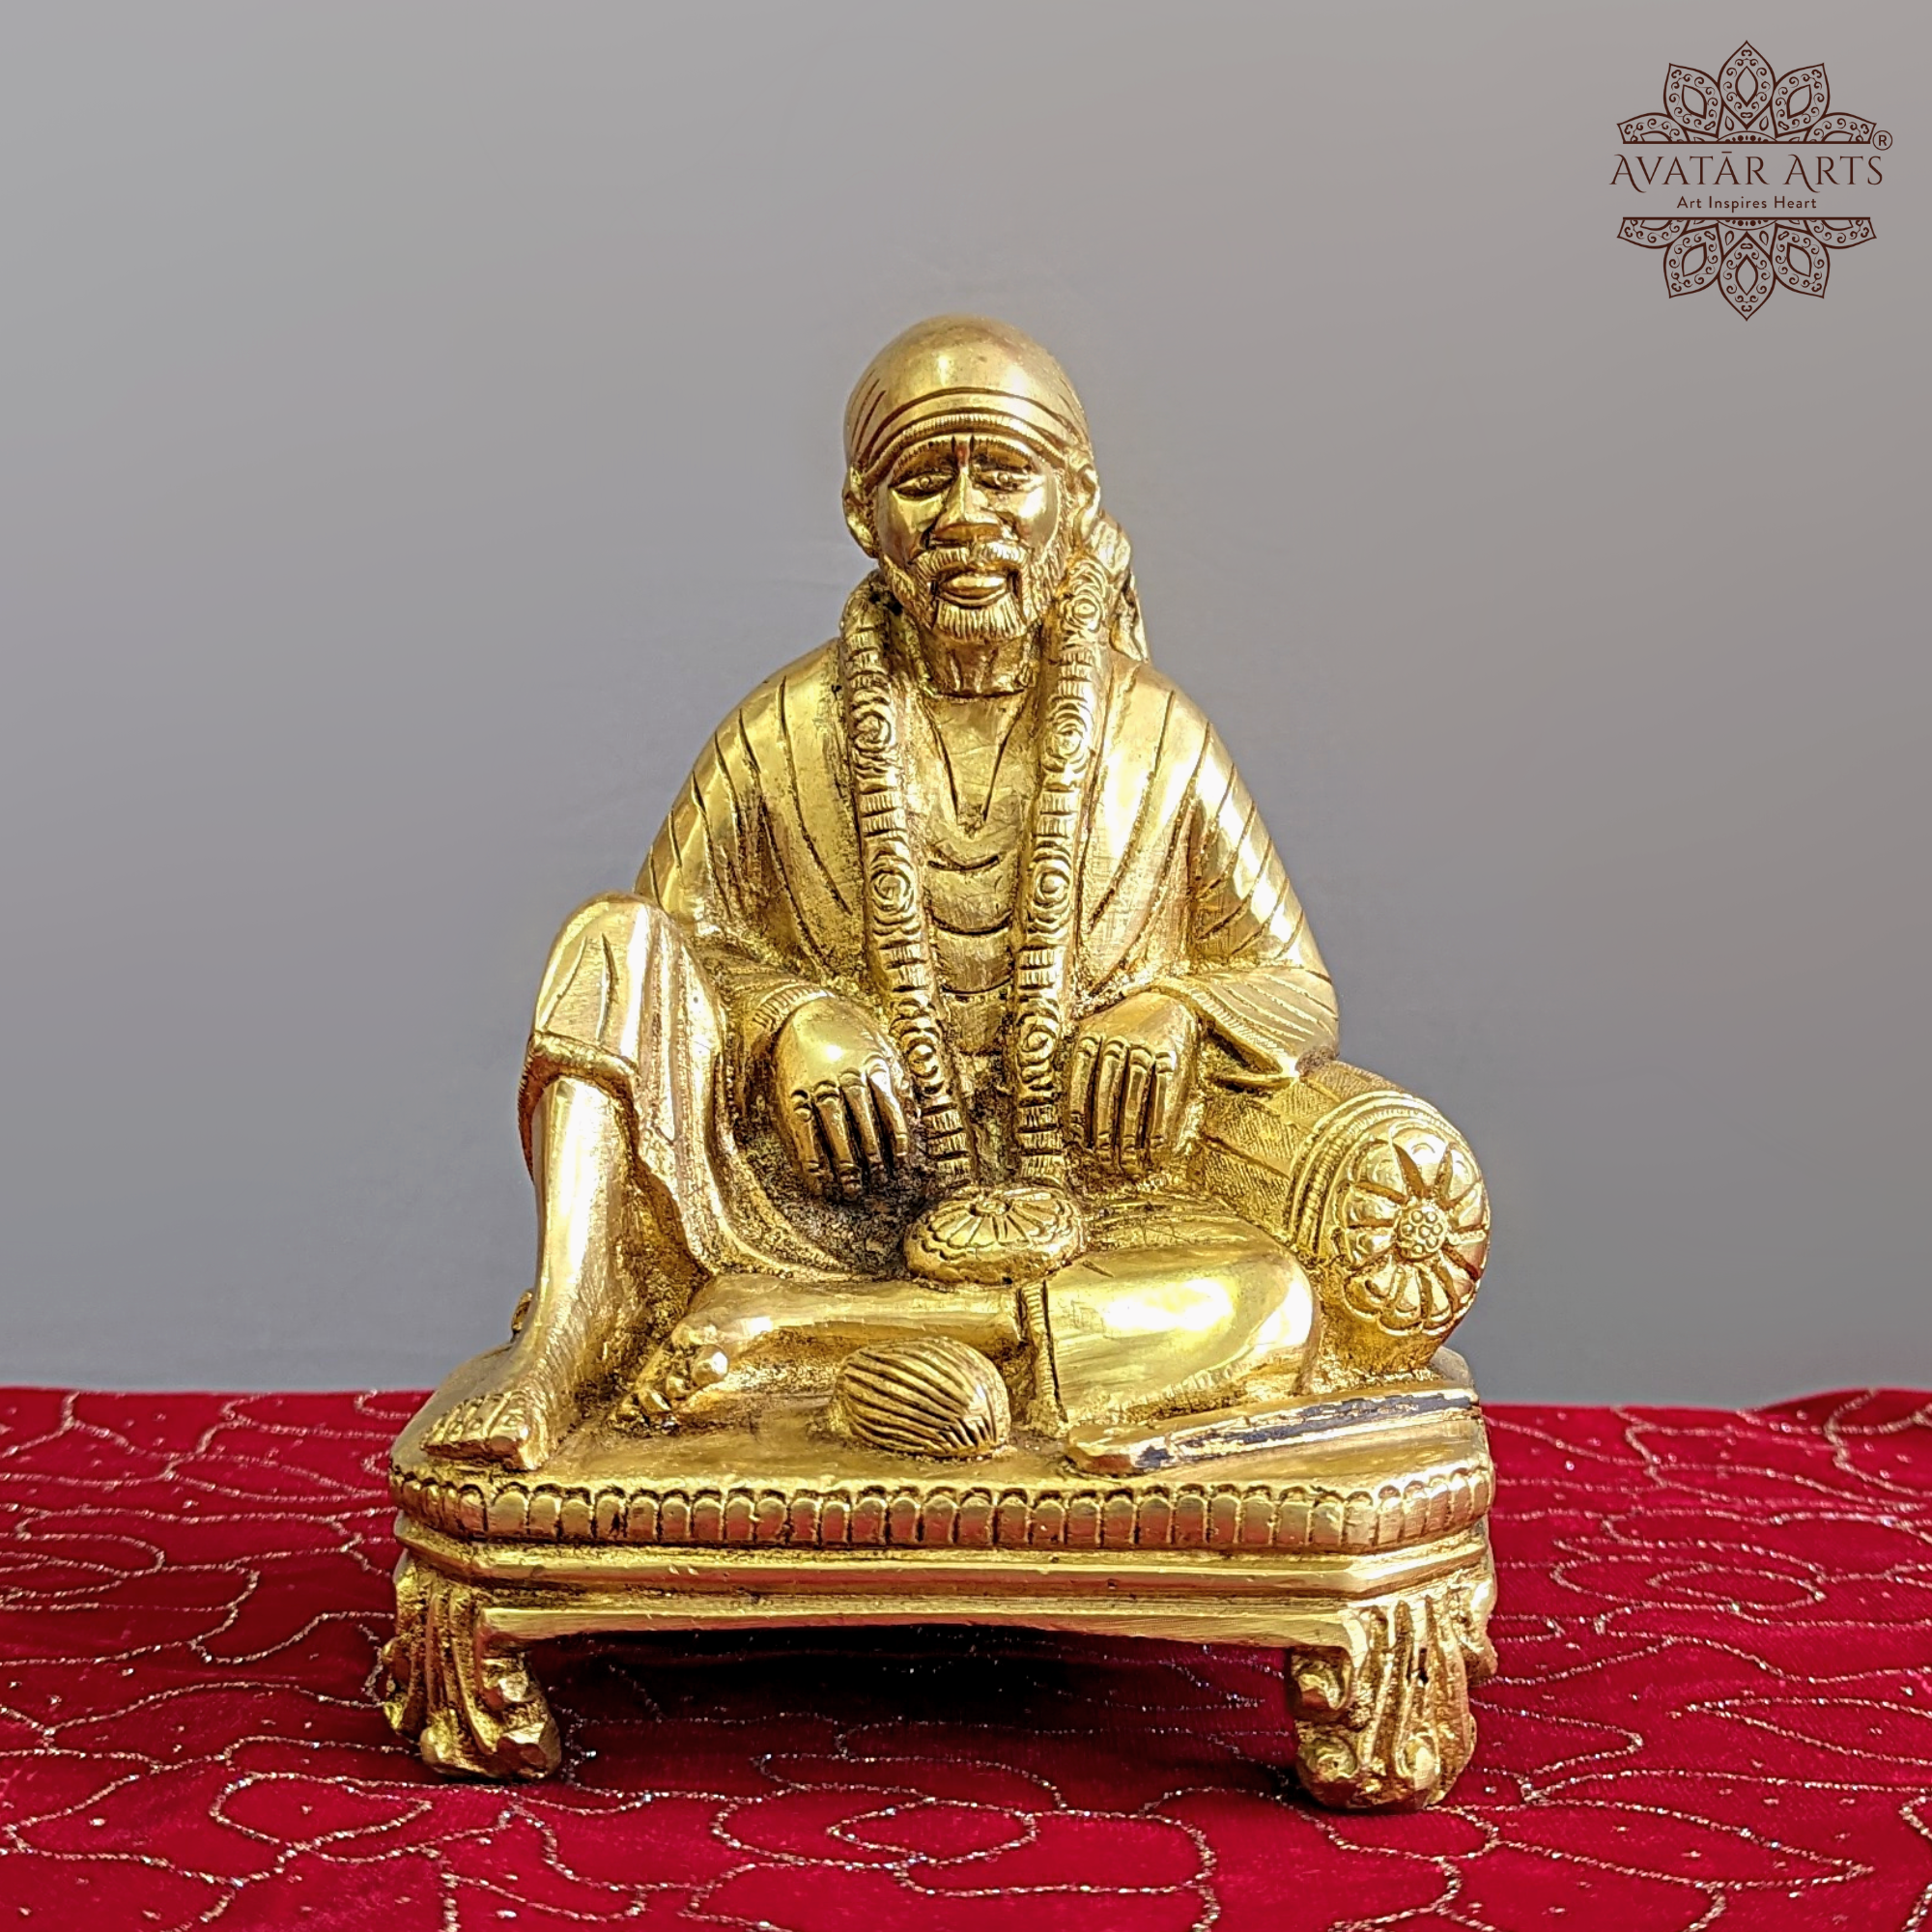 Buy JSM Porcelain Indian Gift Items Hindu God Décor Sai Baba idol in  sitting position Online at Low Prices in India - Amazon.in